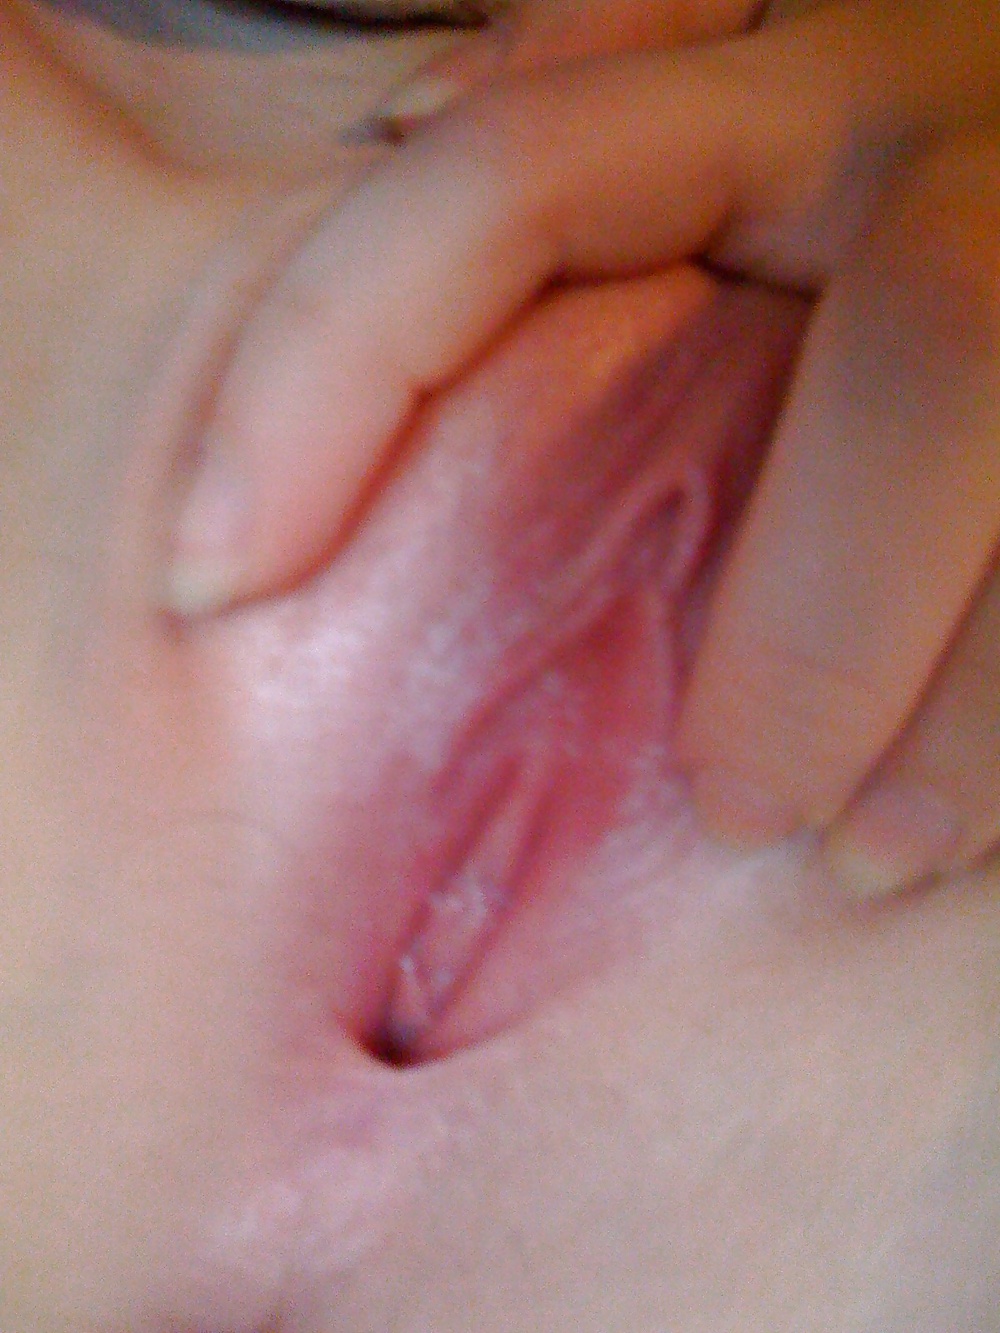 Vaginas 11 More young nice pussies for you adult photos